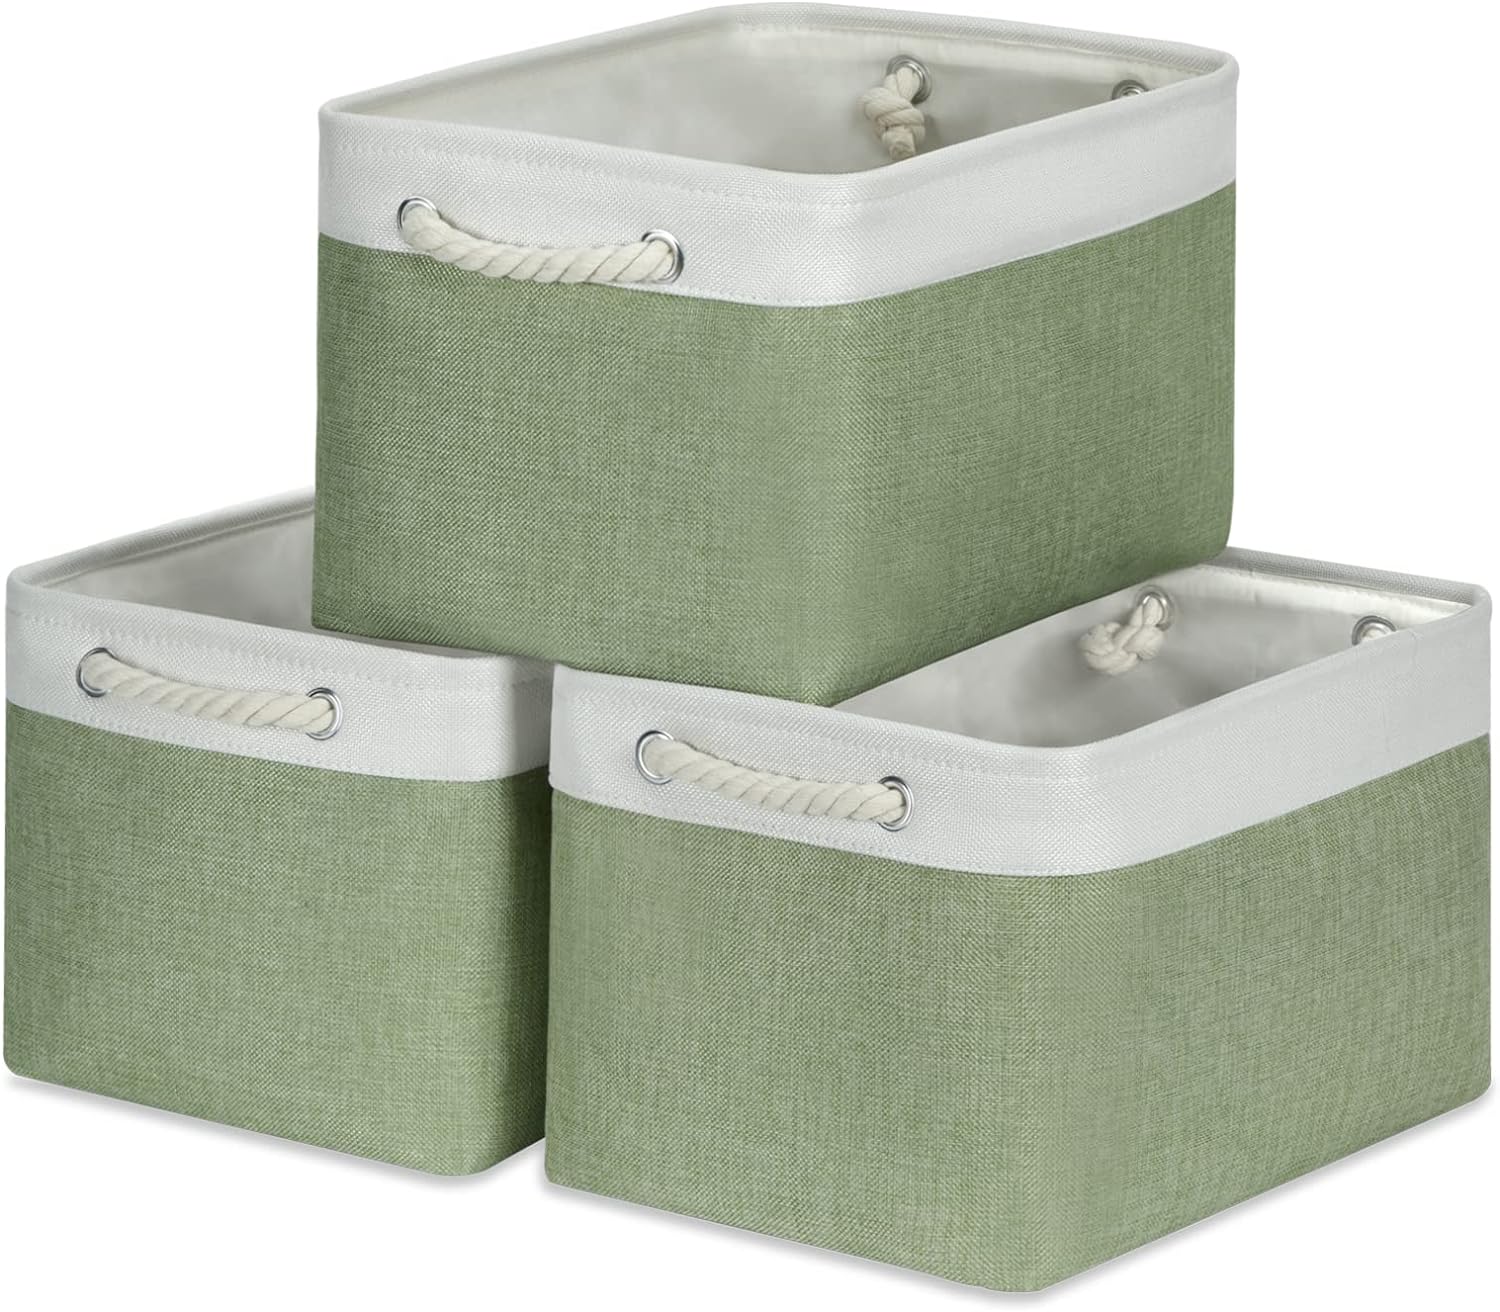 Temary Storage Baskets Fabric Storage Bins for Shelves, 3 Pack Canvas Storage Basket Boxes with Rope Handles for Organizing Toys, Baby Clothes (White&Green,15Lx11Wx9.5H Inches)